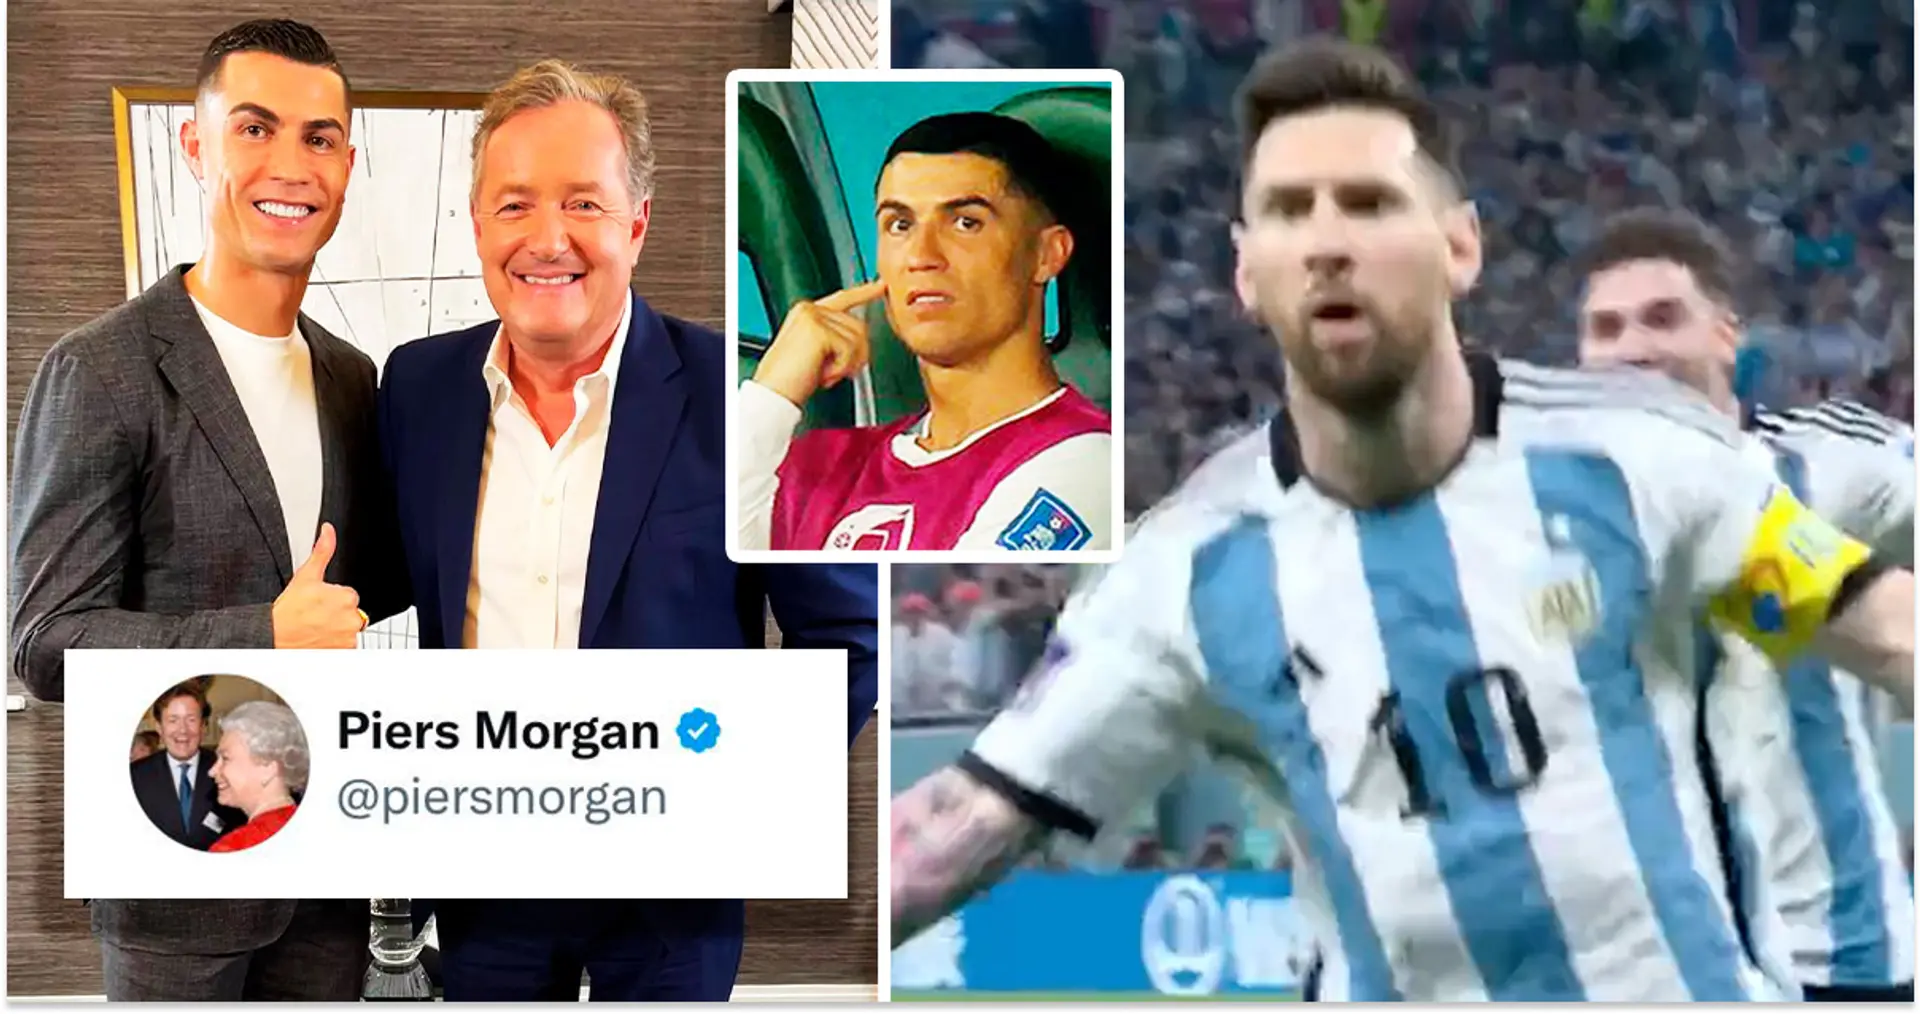 Ronaldo's super fan Piers Morgan reacts to Messi's first ever World Cup knockout goal - not how you'd expect